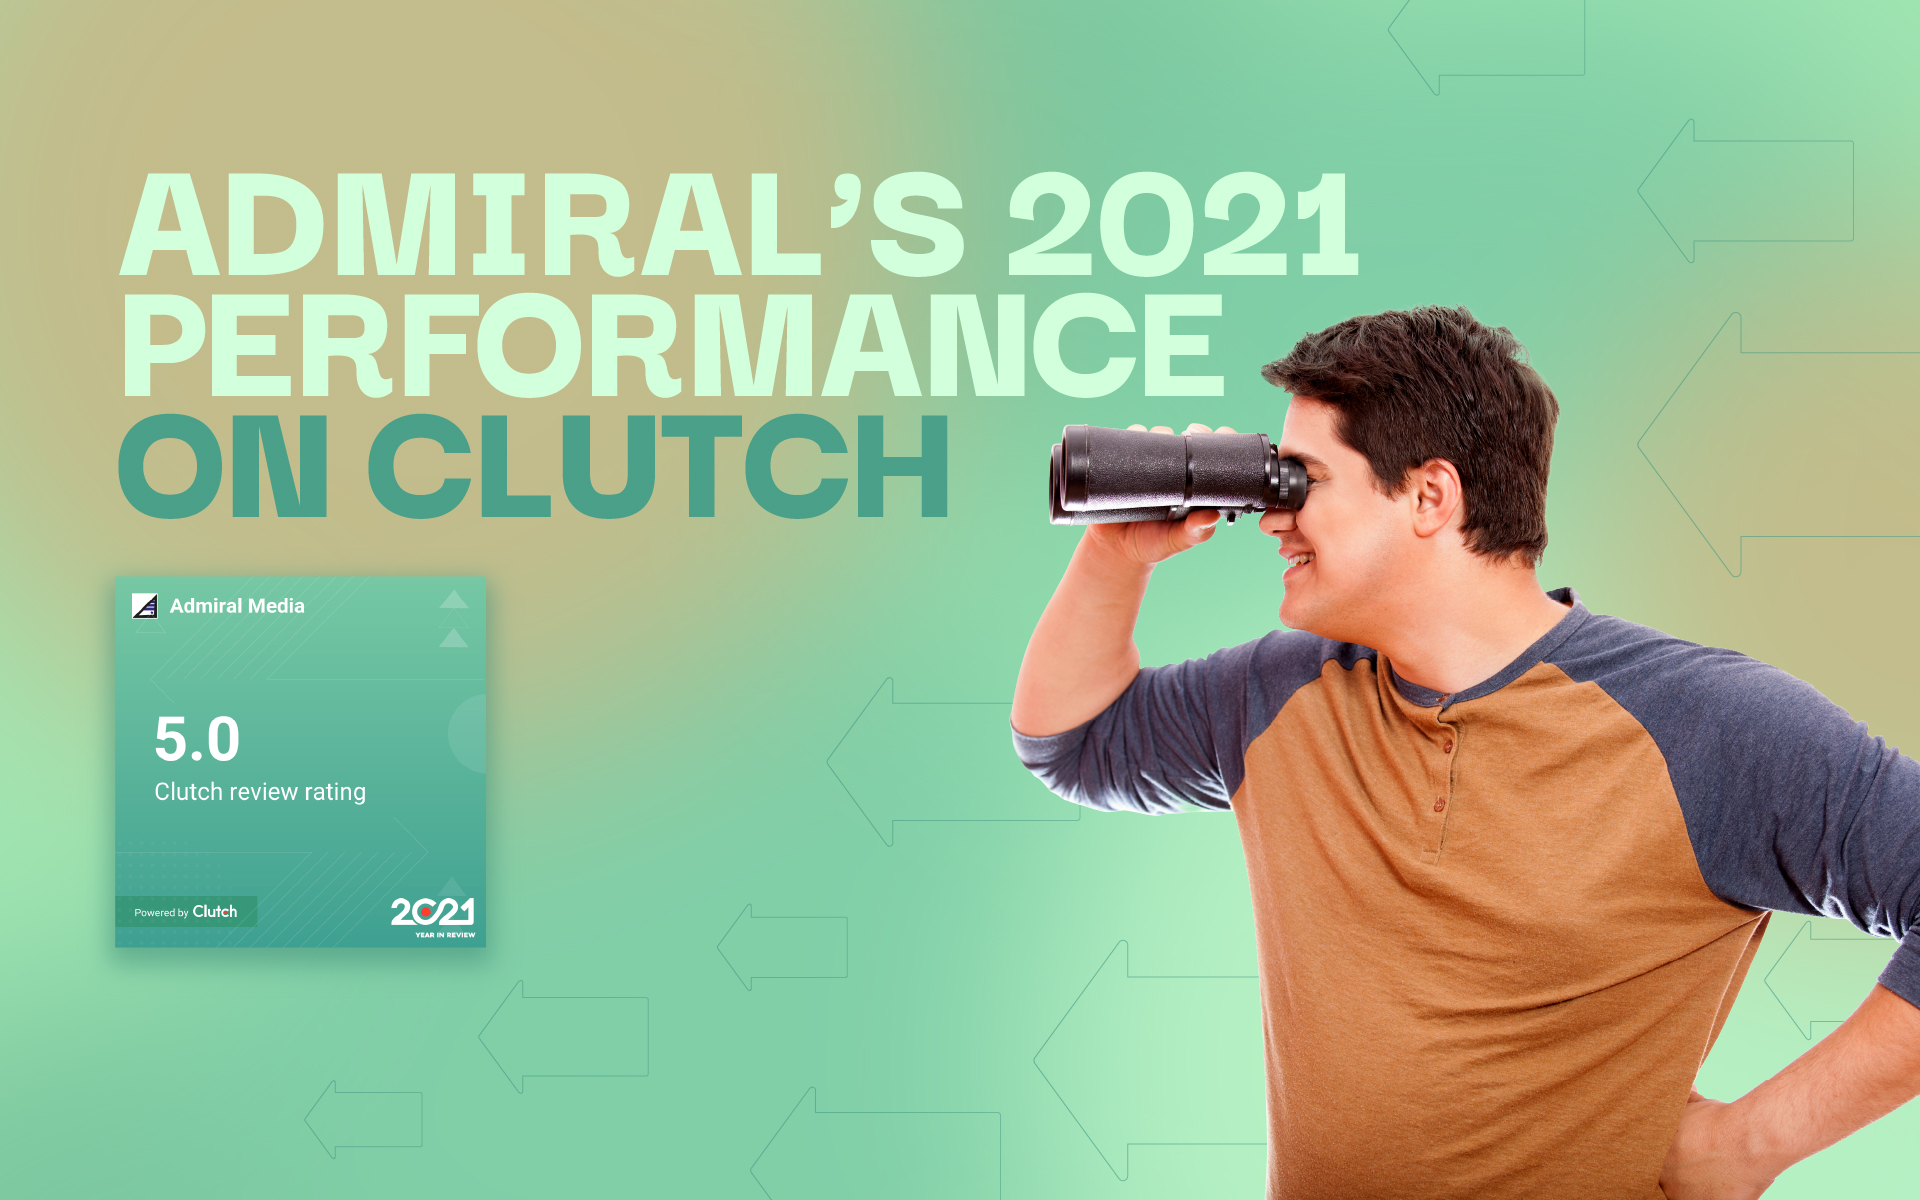 Admiral Media Looks Back on 2021 Performance on Clutch